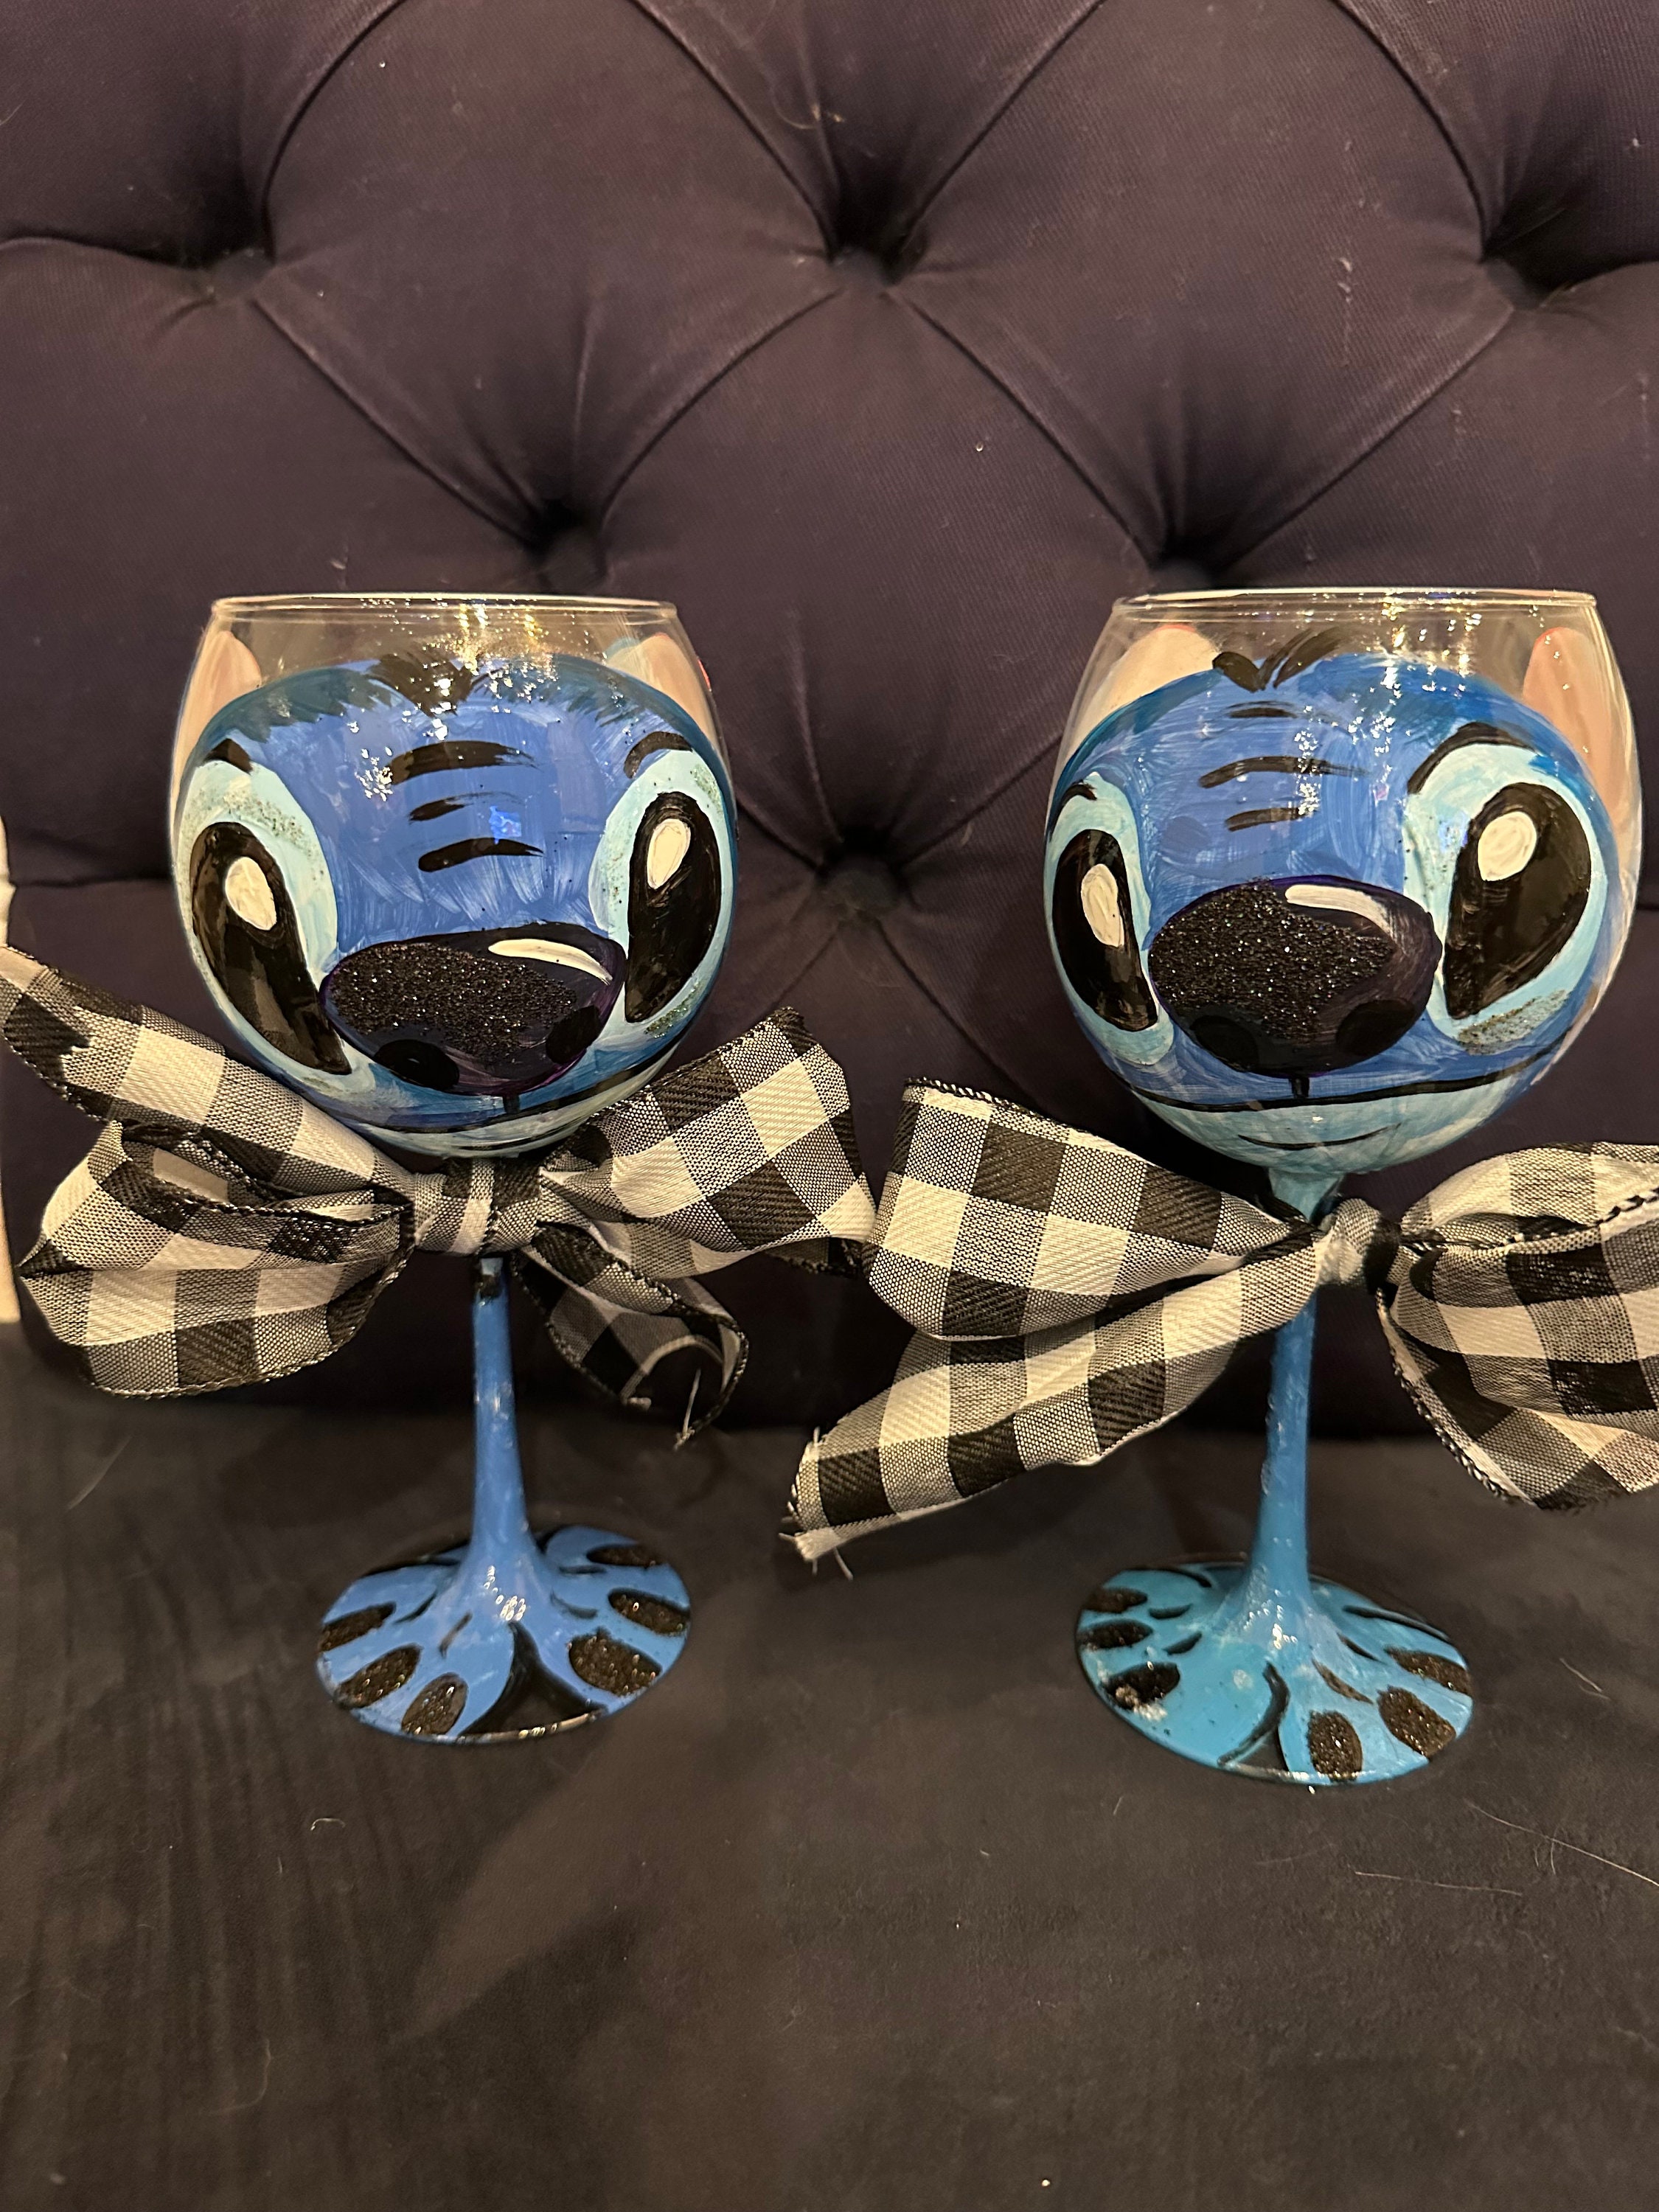 Disney Lilo and Stitch Ohana Means Family Floral Sketch Pose  Stemless Wine Glasses, Set of 2: Wine Glasses